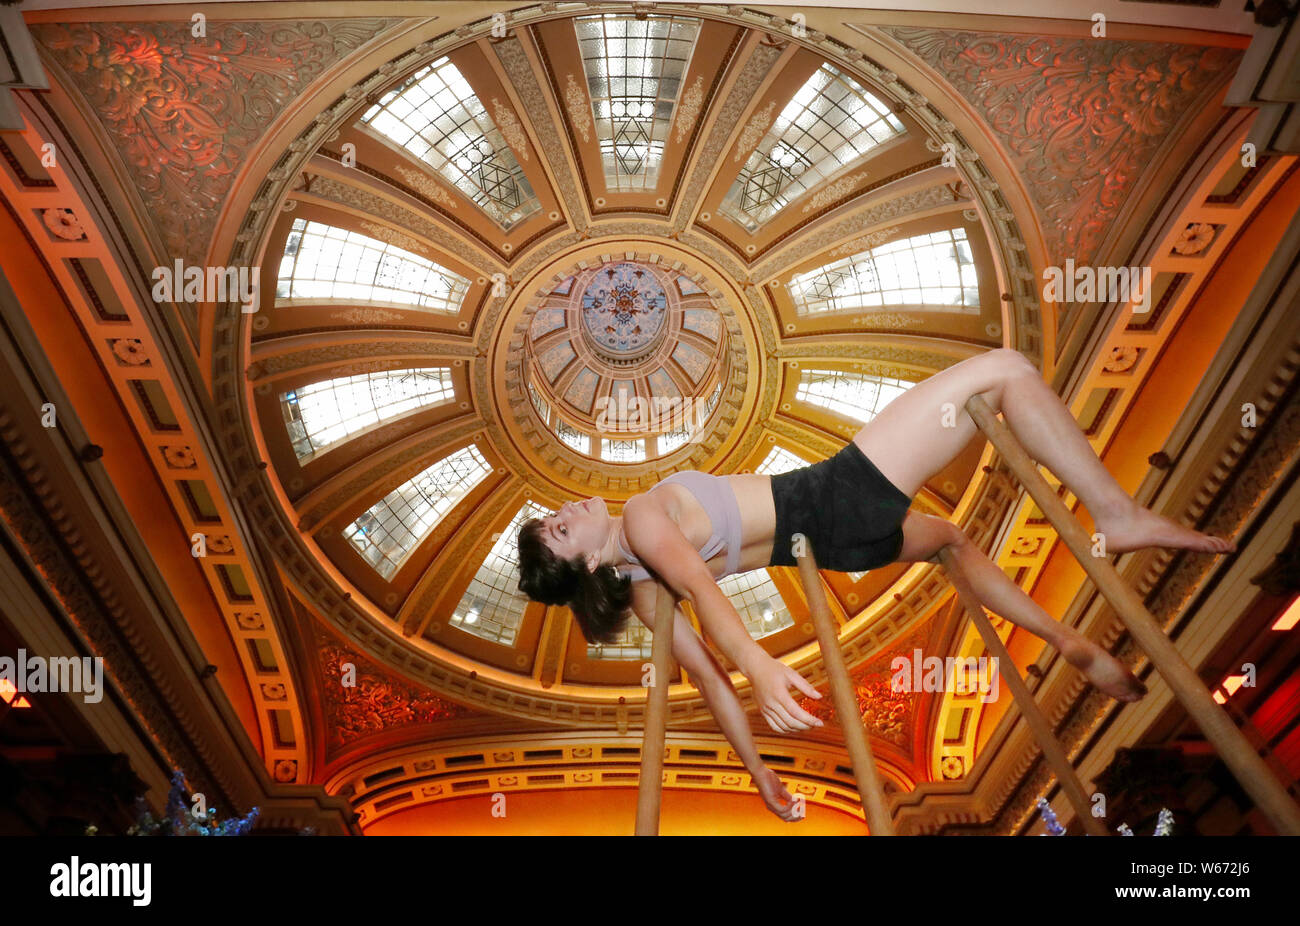 Acrobat Alyssa Moore from contemporary circus company Gravity & Other Myths practices part of a routine from their show Backbone at The Dome in Edinburgh ahead of their Edinburgh Festival Fringe debut at Underbelly's McEwan Hall. Stock Photo